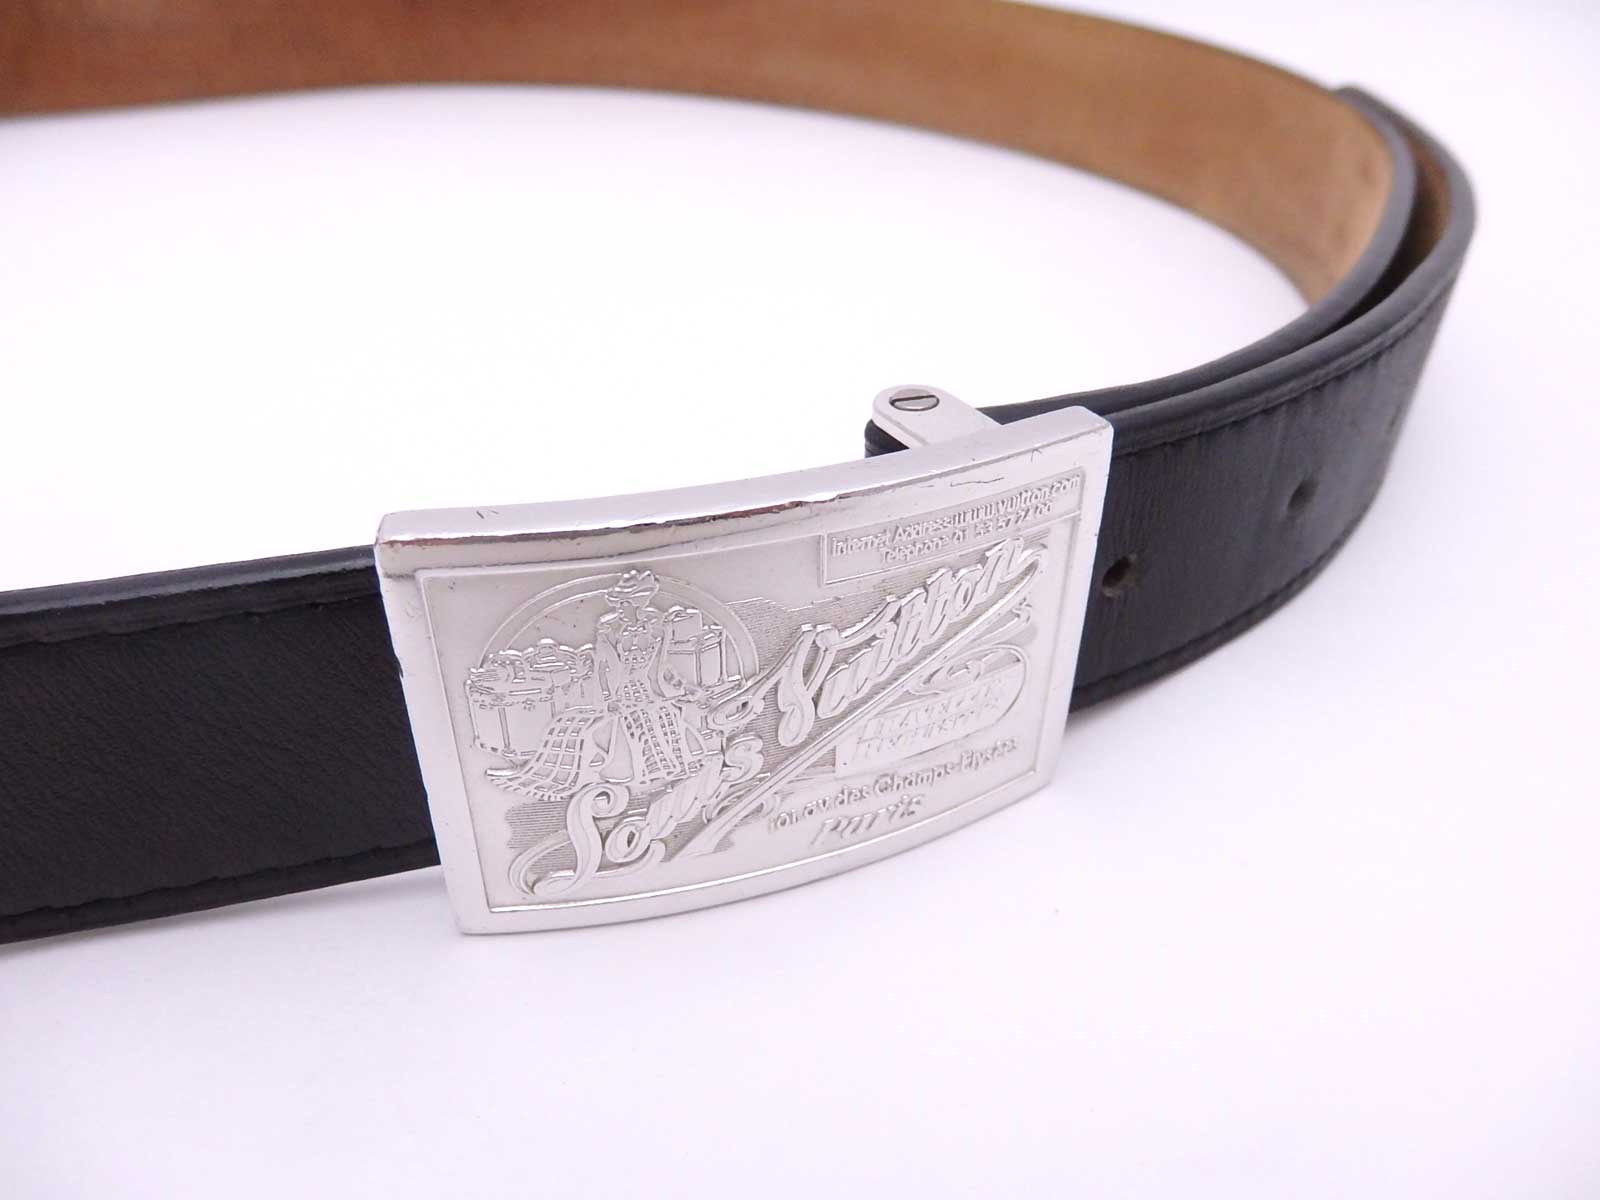 Auth Louis Vuitton Buckle Belt Size: 90/36 Black Leather/Silver *USED* - e26780 | eBay